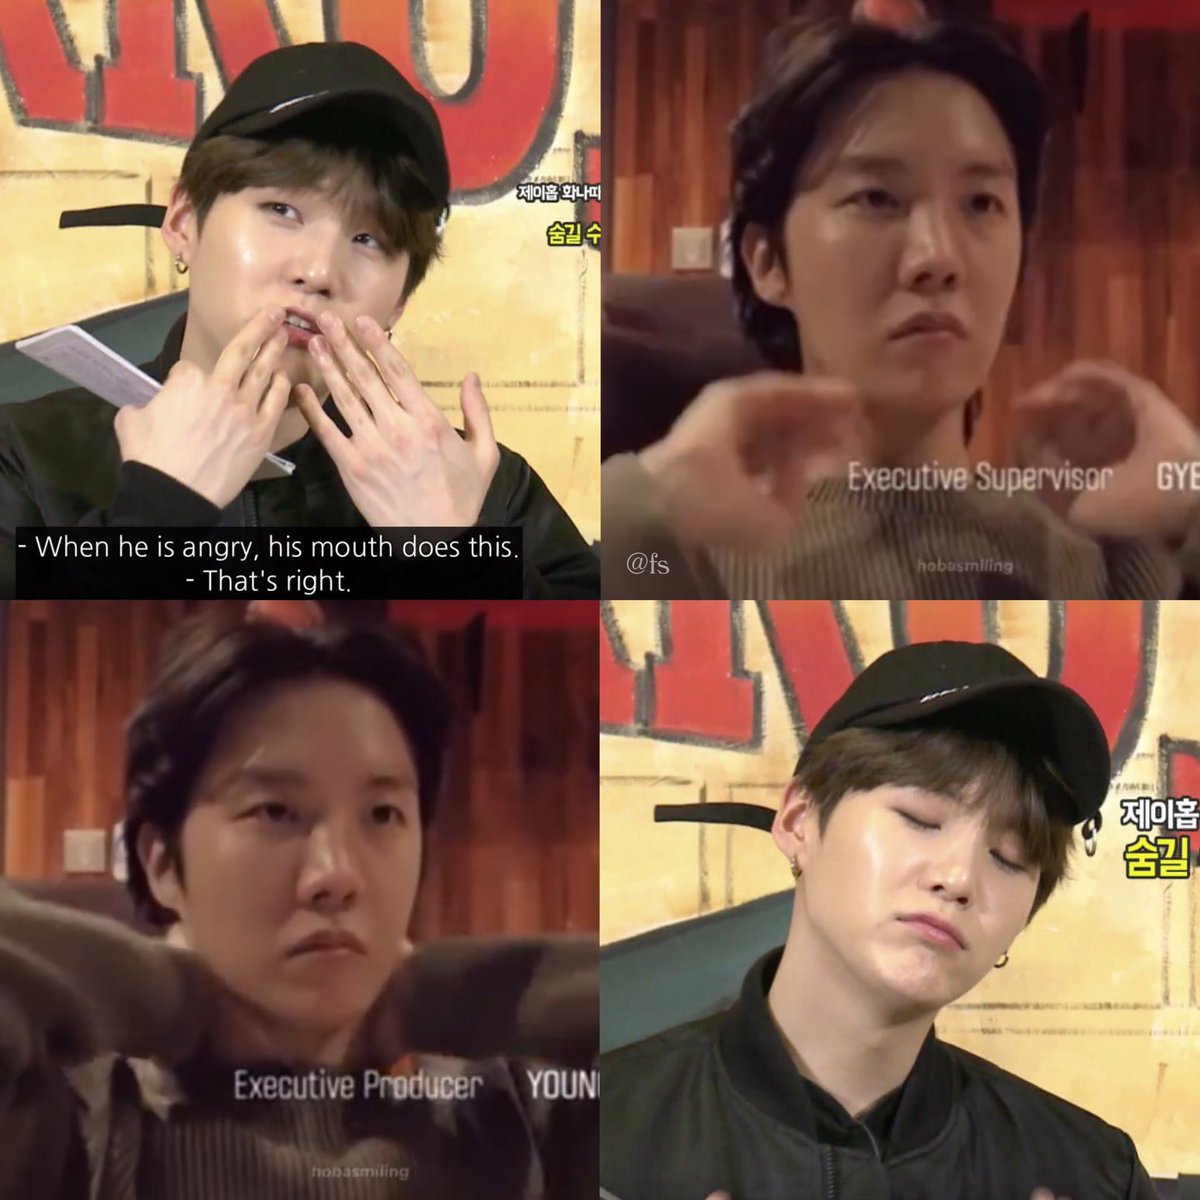 do you remember when yoongi explained us how hoseok’s mouth turns into “ㅅ” when he is angry? 😂😂